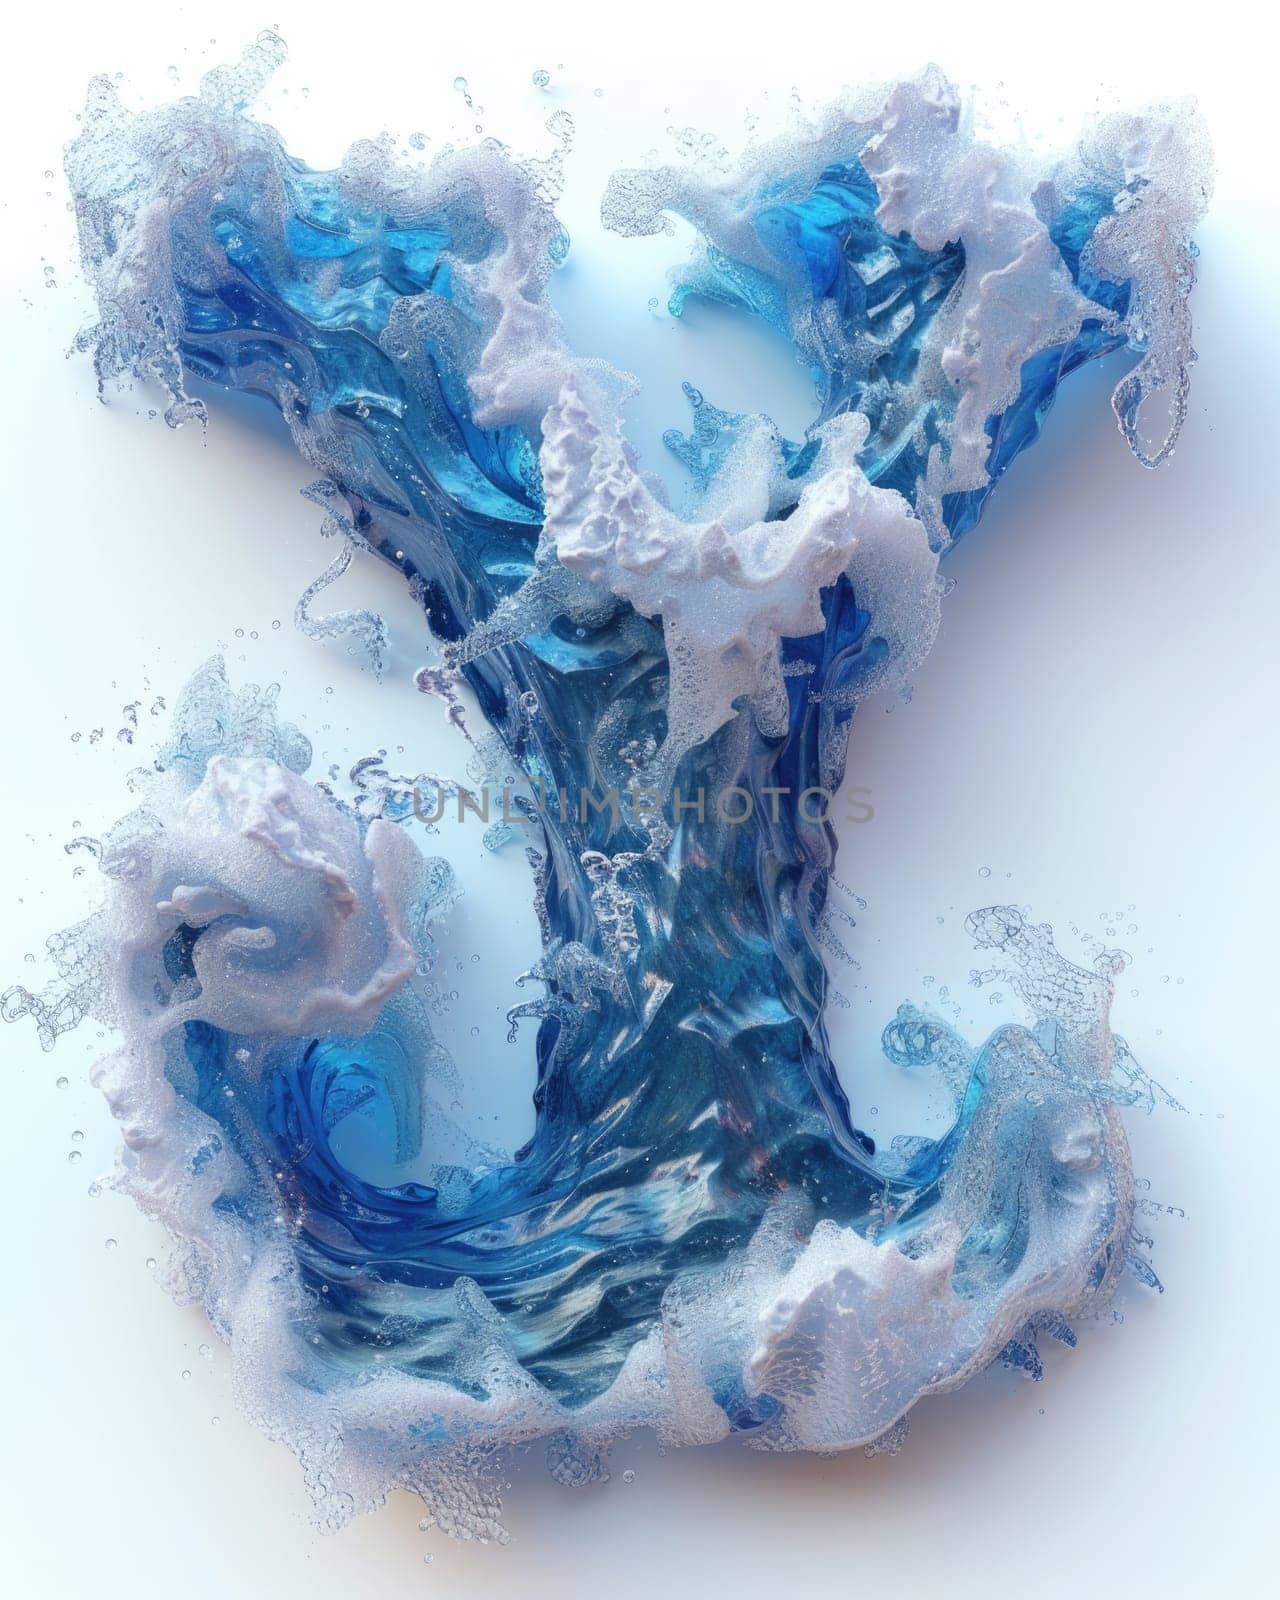 A visually striking piece of artwork made from blue and white paint, resembling letters in the form of the sea.